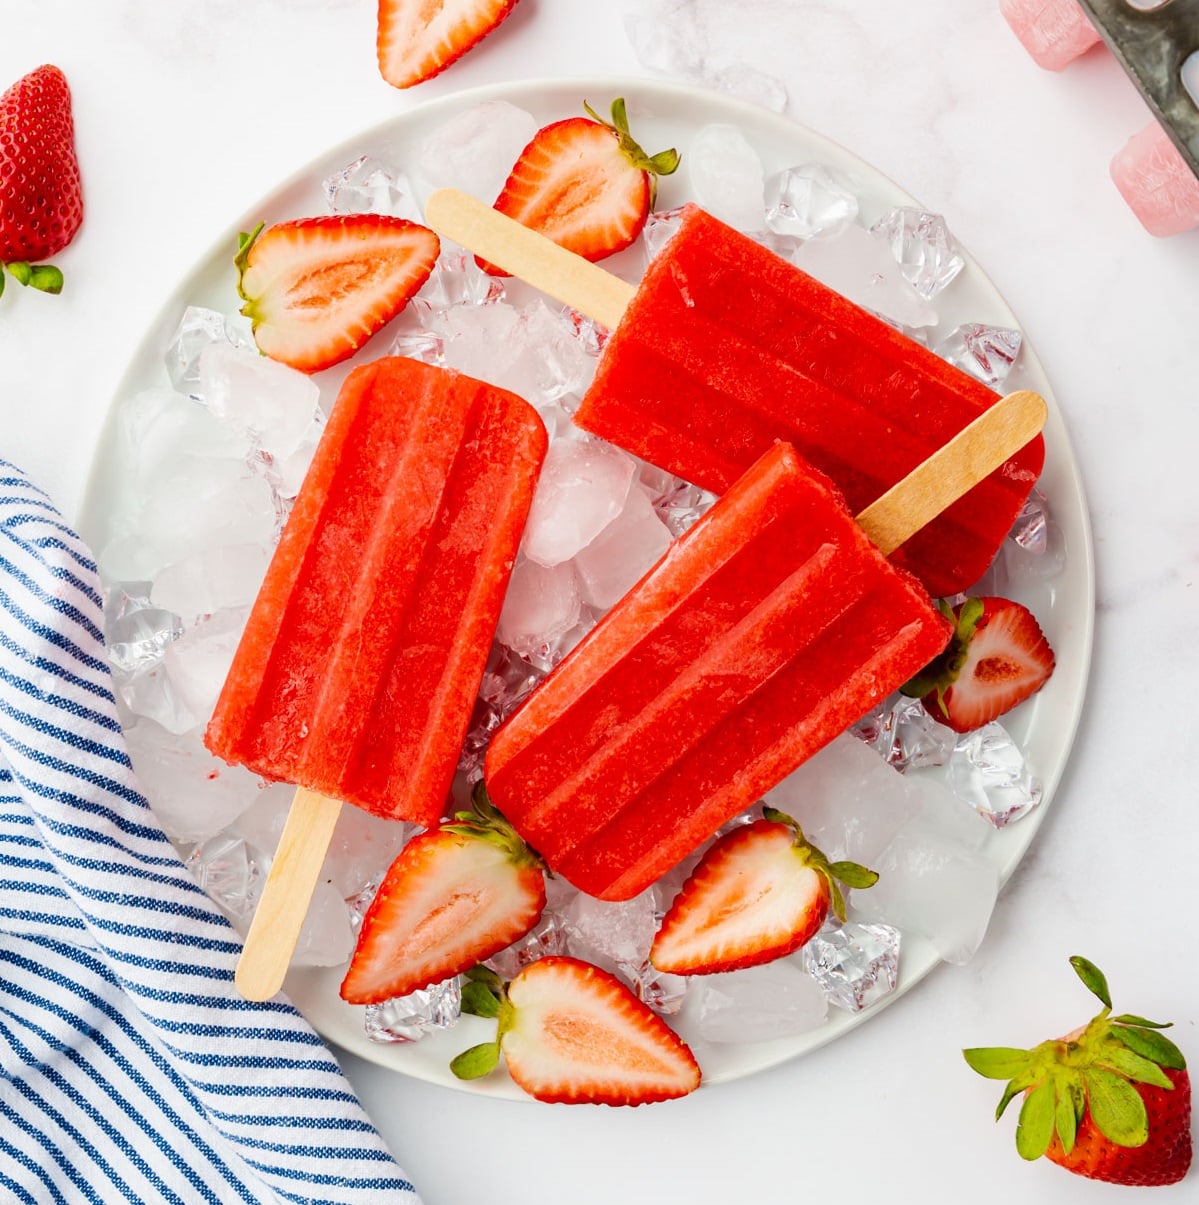 A round plate of ice topped with three homemade strawberry popsicles and halved berries.